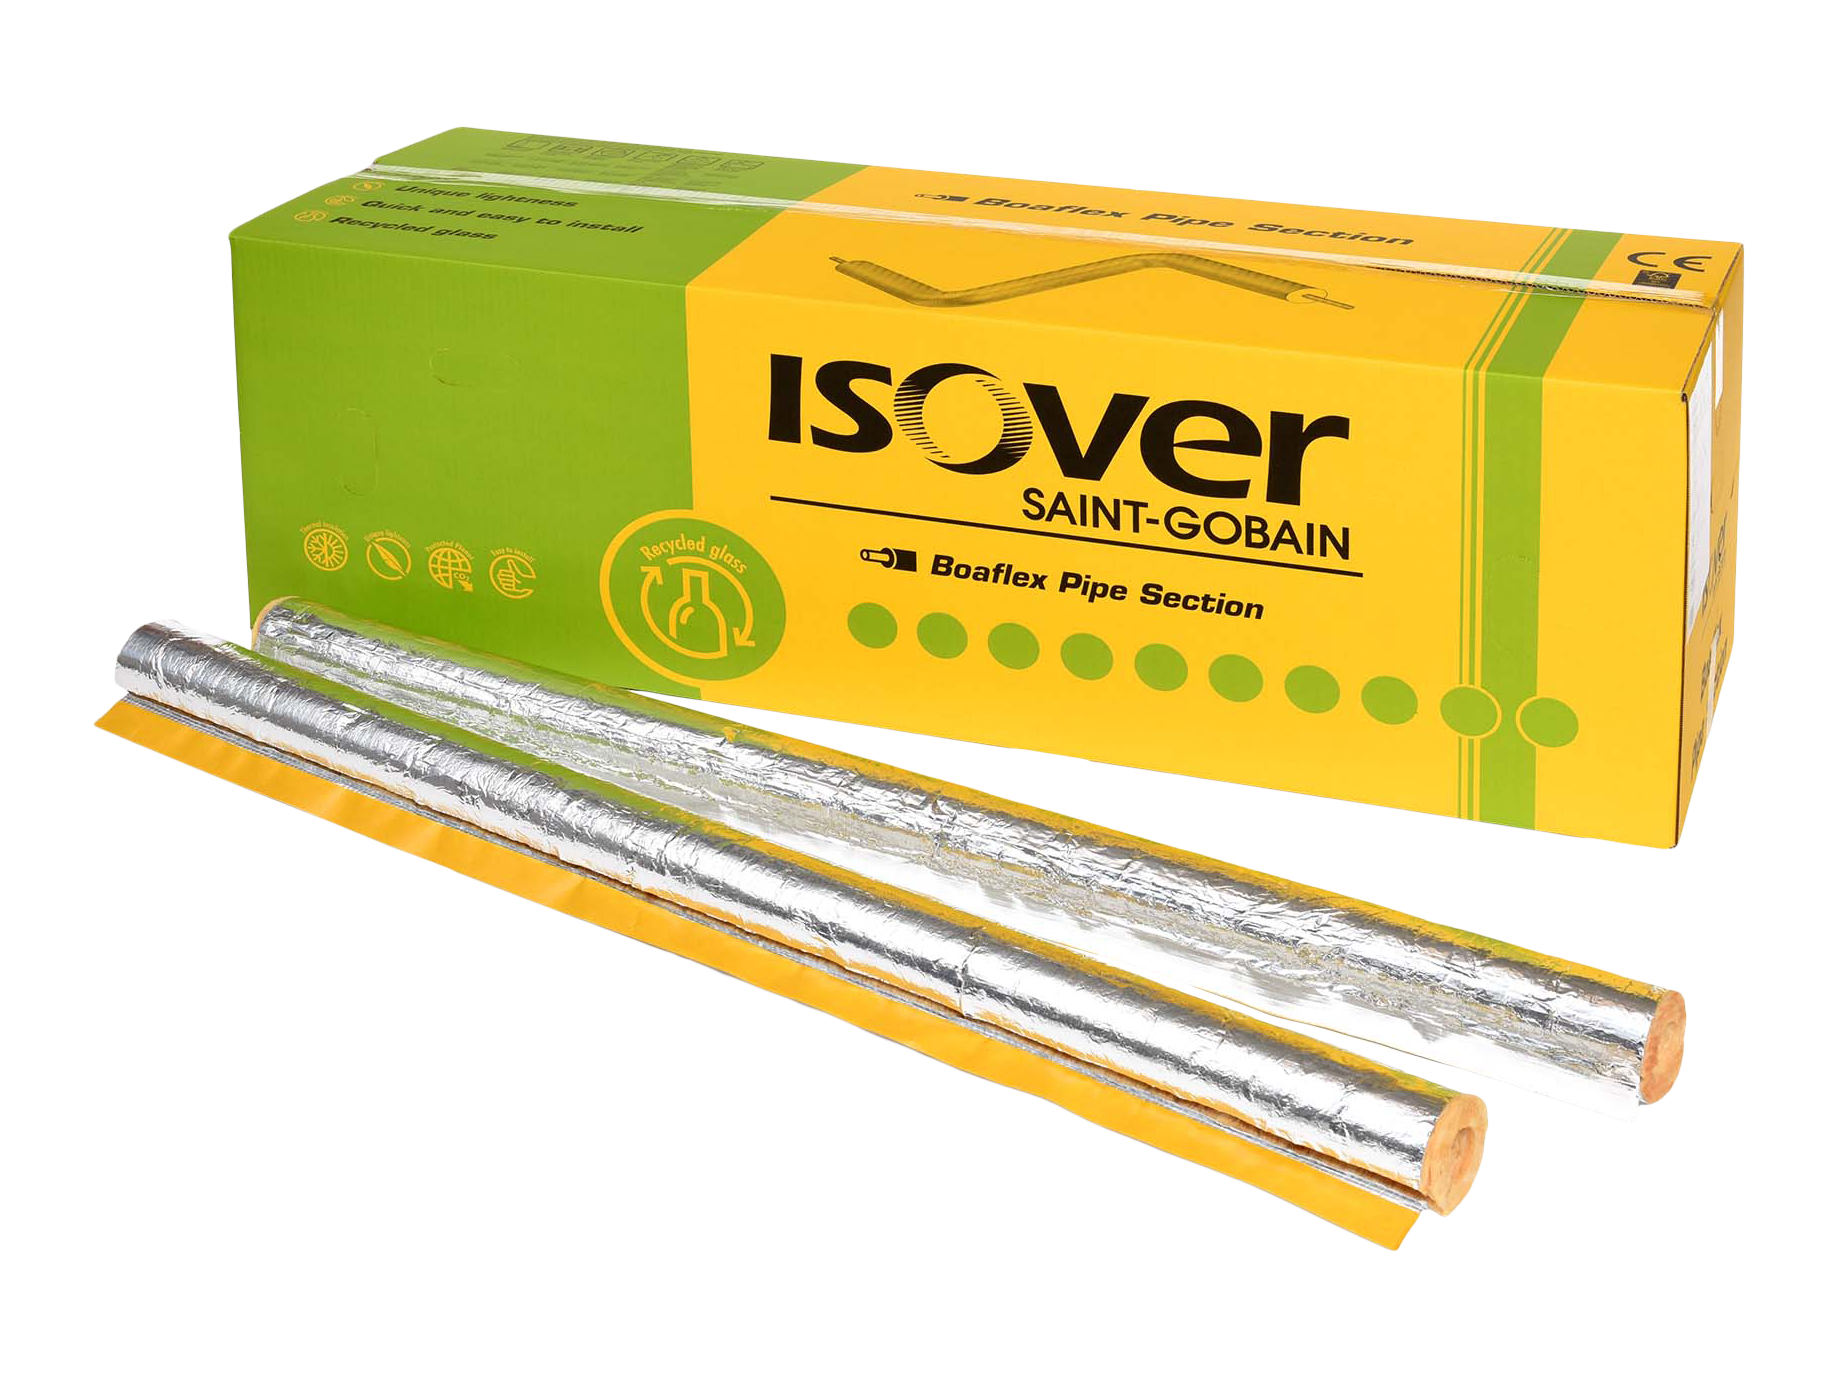 ISOVER Boaflex Pipe Section 60/30